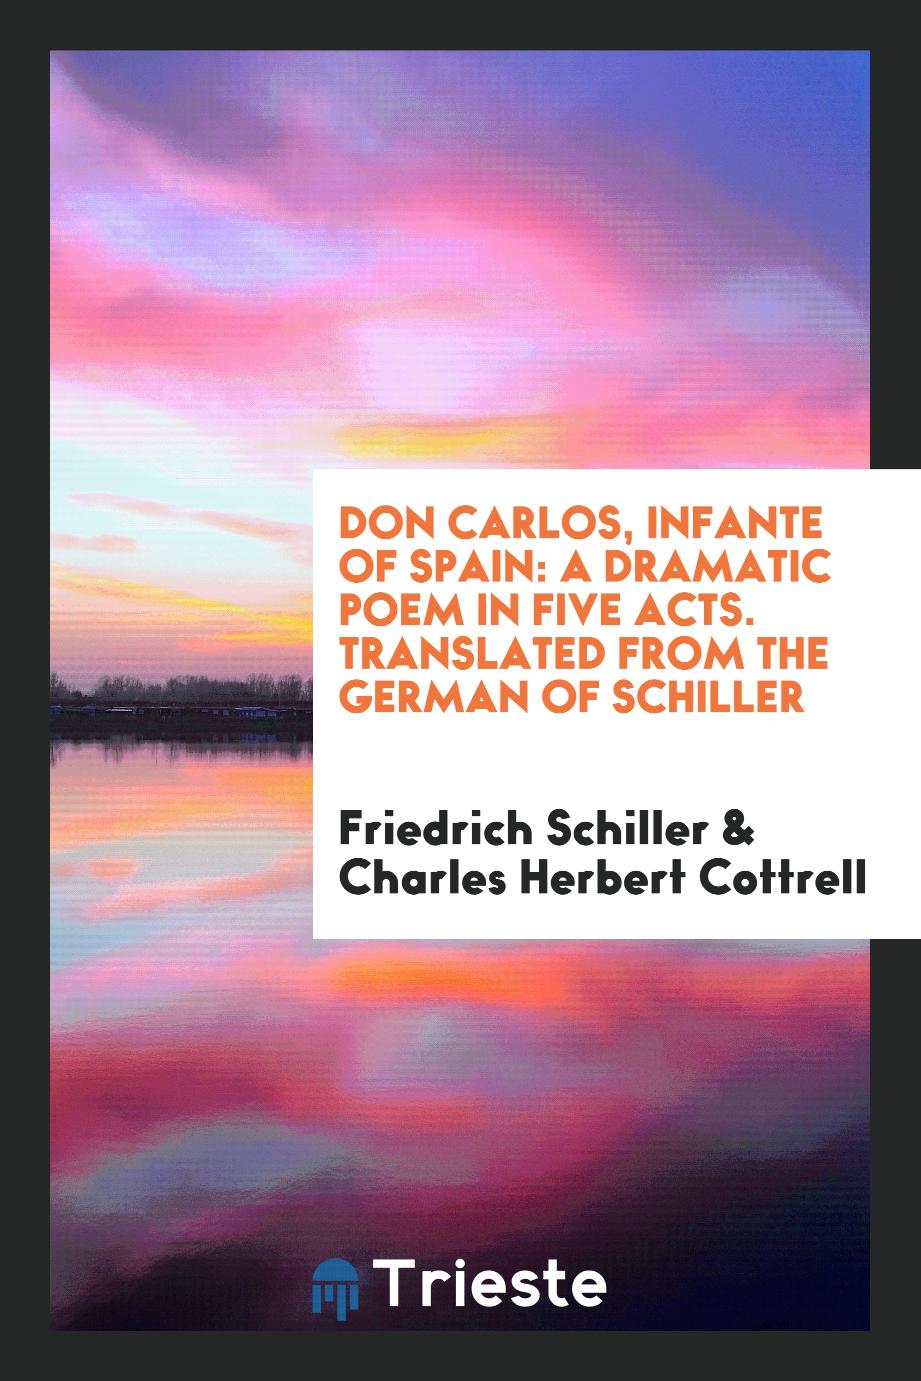 Friedrich Schiller, Charles Herbert Cottrell - Don Carlos, Infante of Spain: A Dramatic Poem in Five Acts. Translated from the German of Schiller